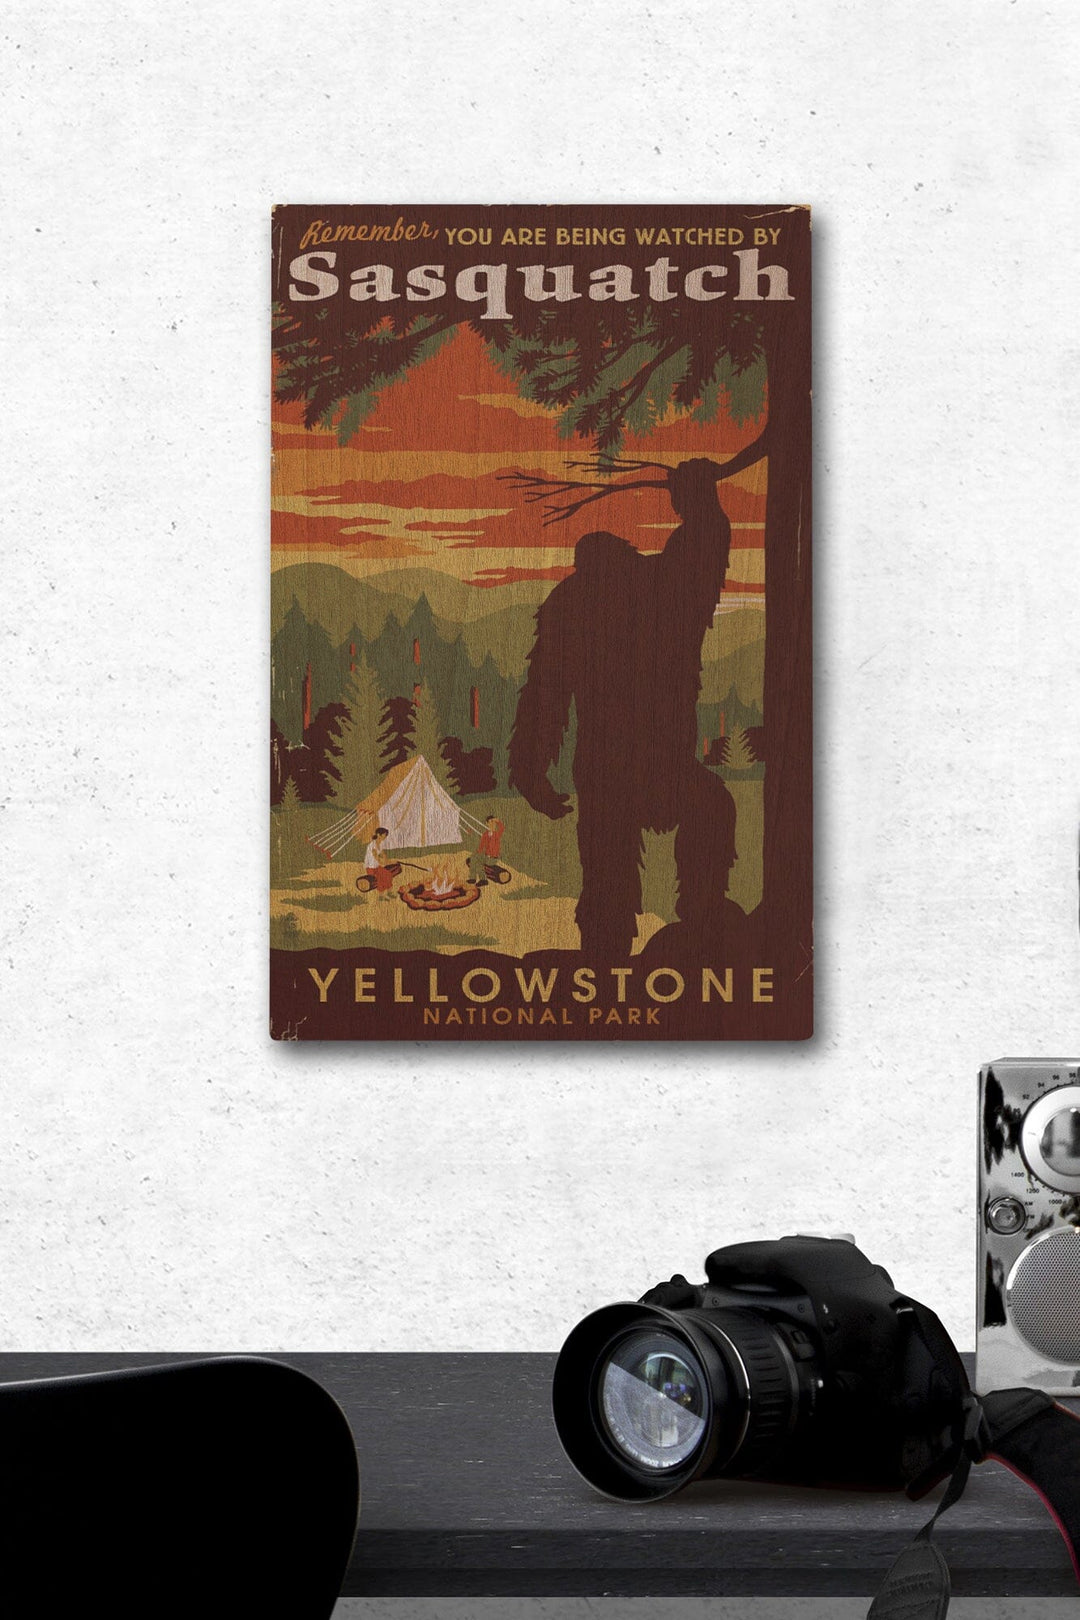 Yellowstone National Park, You Are Being Watched By Sasquatch, Lantern Press Artwork, Wood Signs and Postcards Wood Lantern Press 12 x 18 Wood Gallery Print 